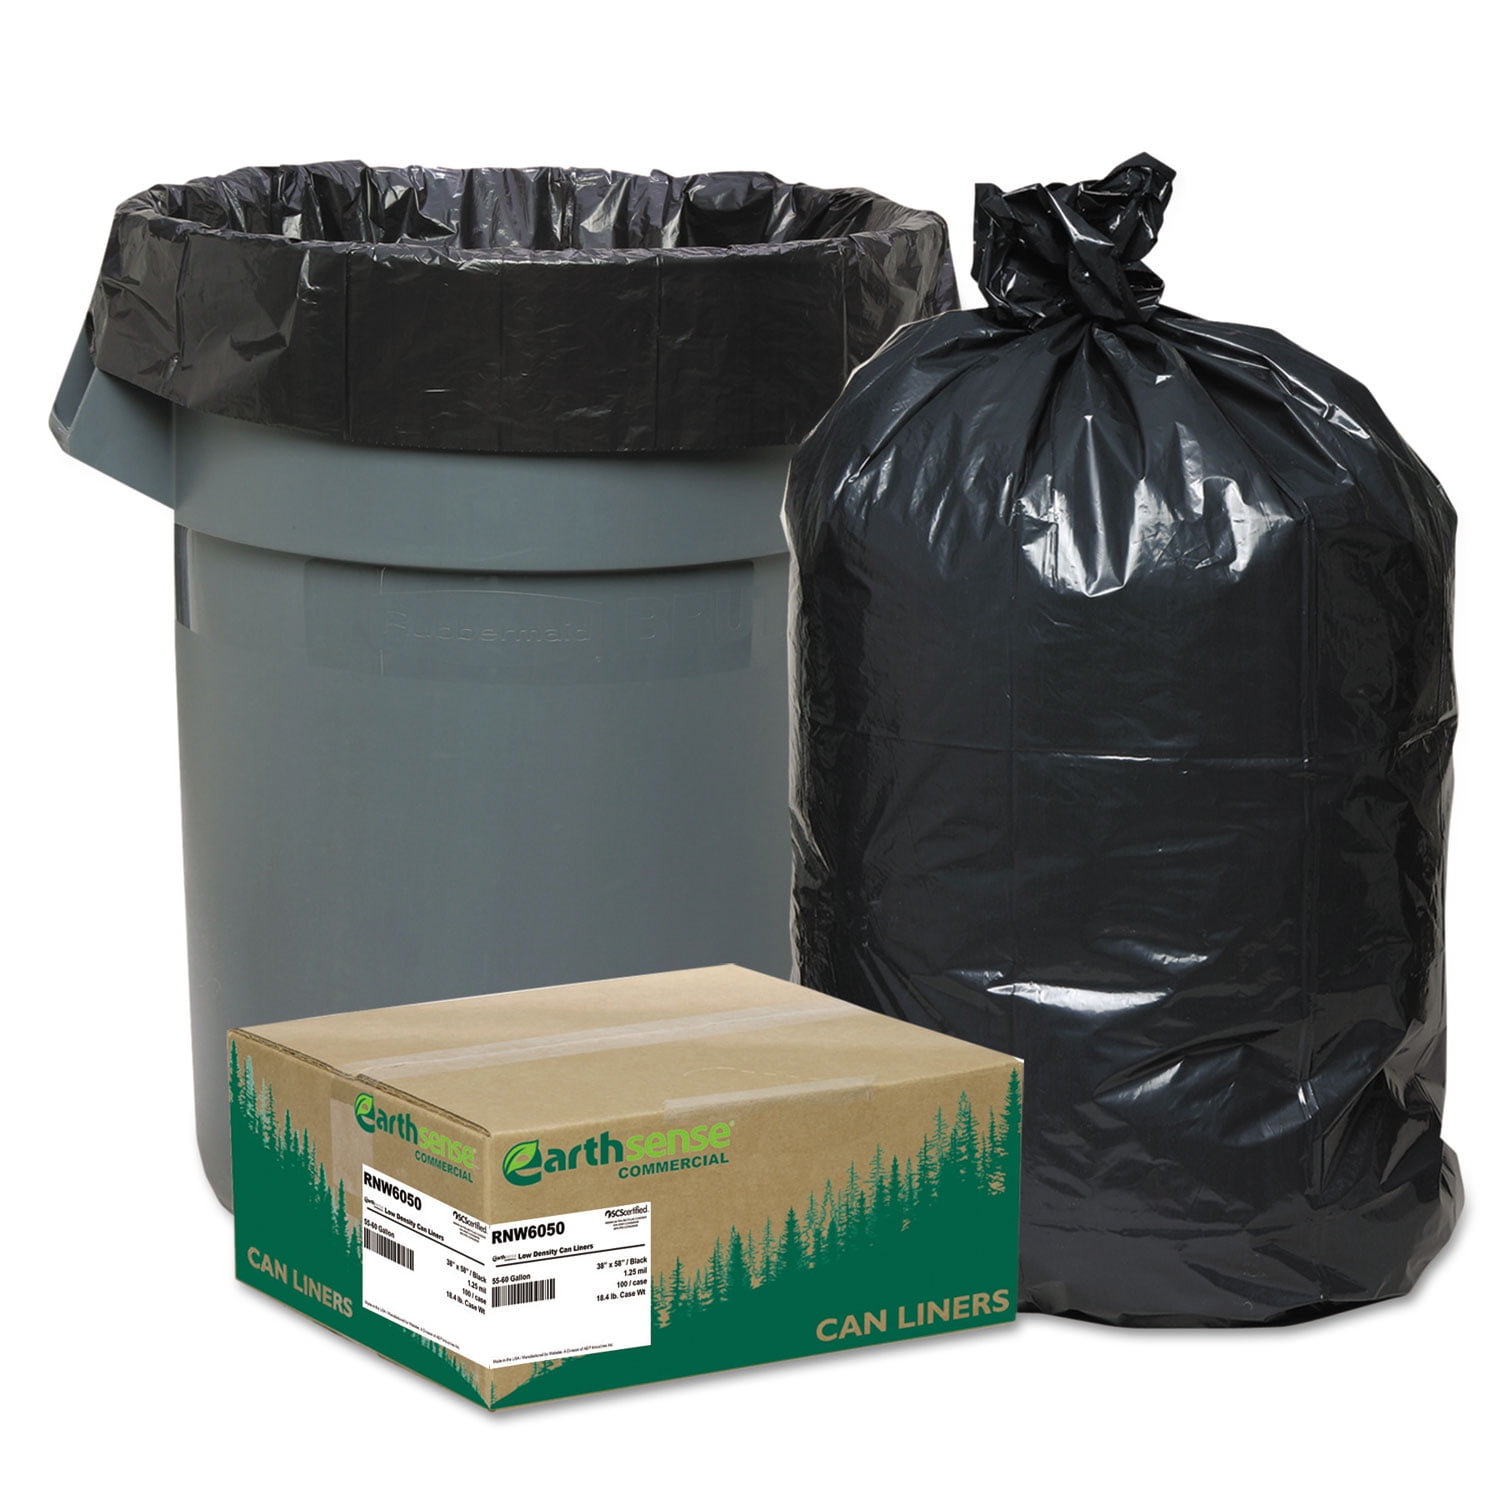 Earthsense Commercial Recycled Can Liners 55-60gal 1.25mil 38 x 58 Black 100